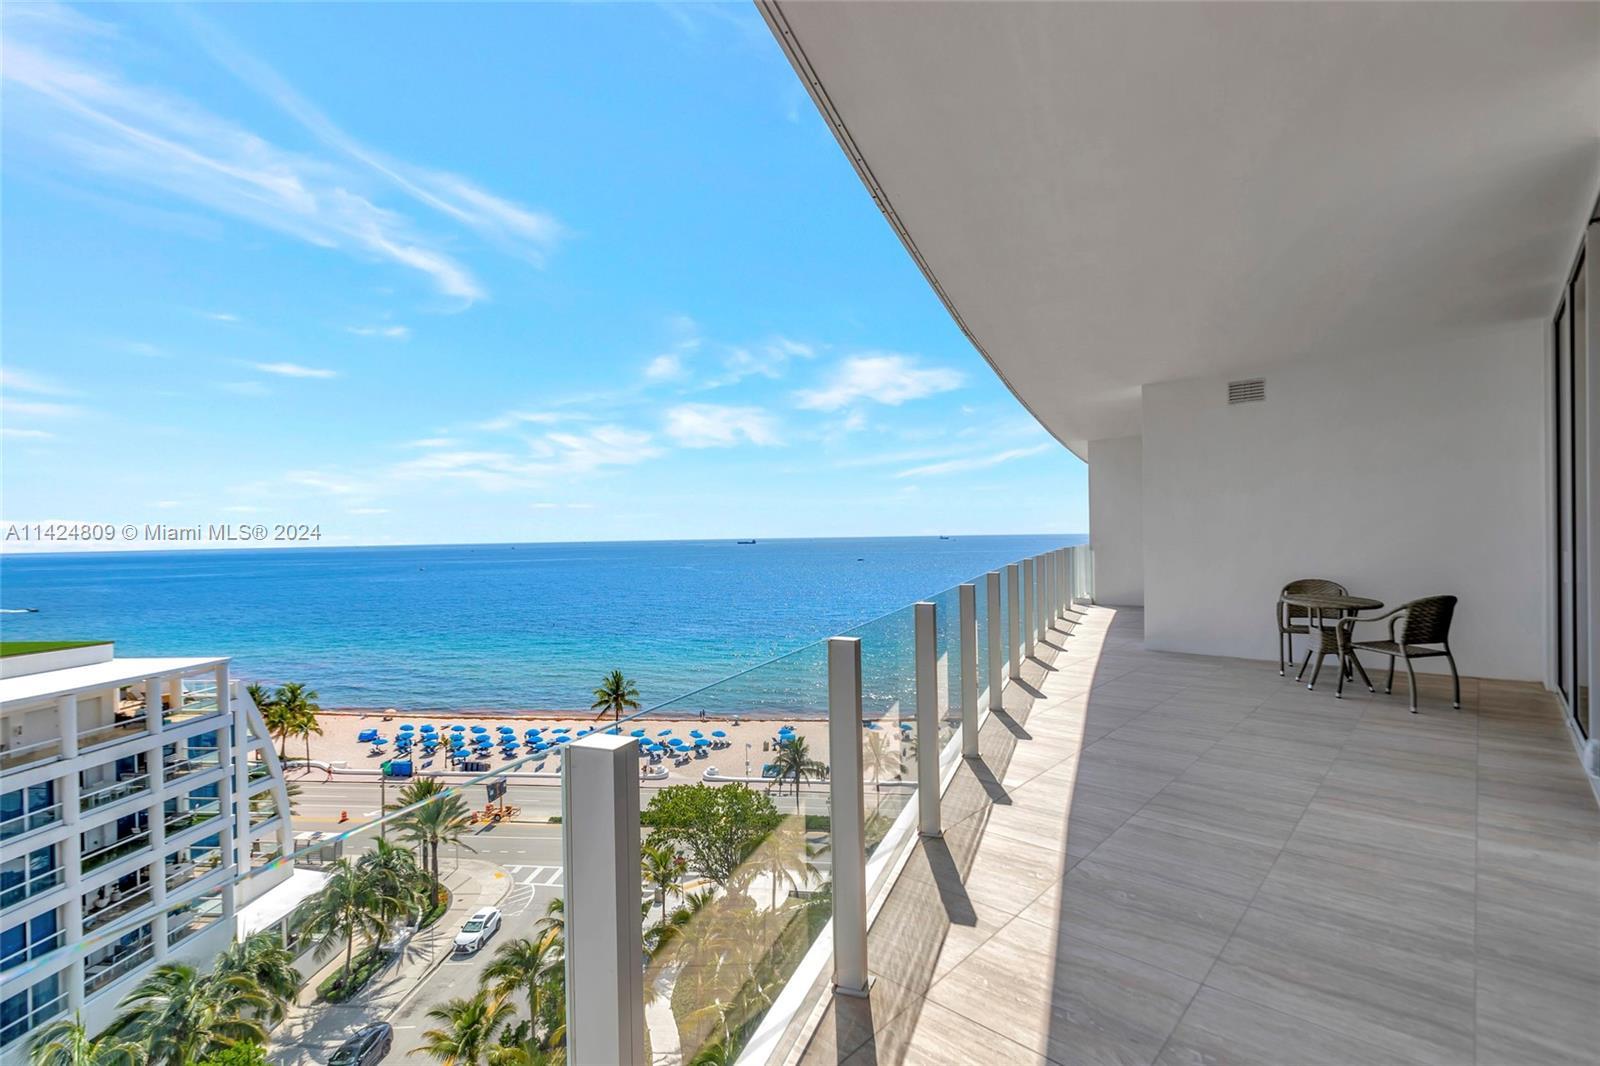 Photo of 525 Fort Lauderdale Beach Blvd #802 in Fort Lauderdale, FL